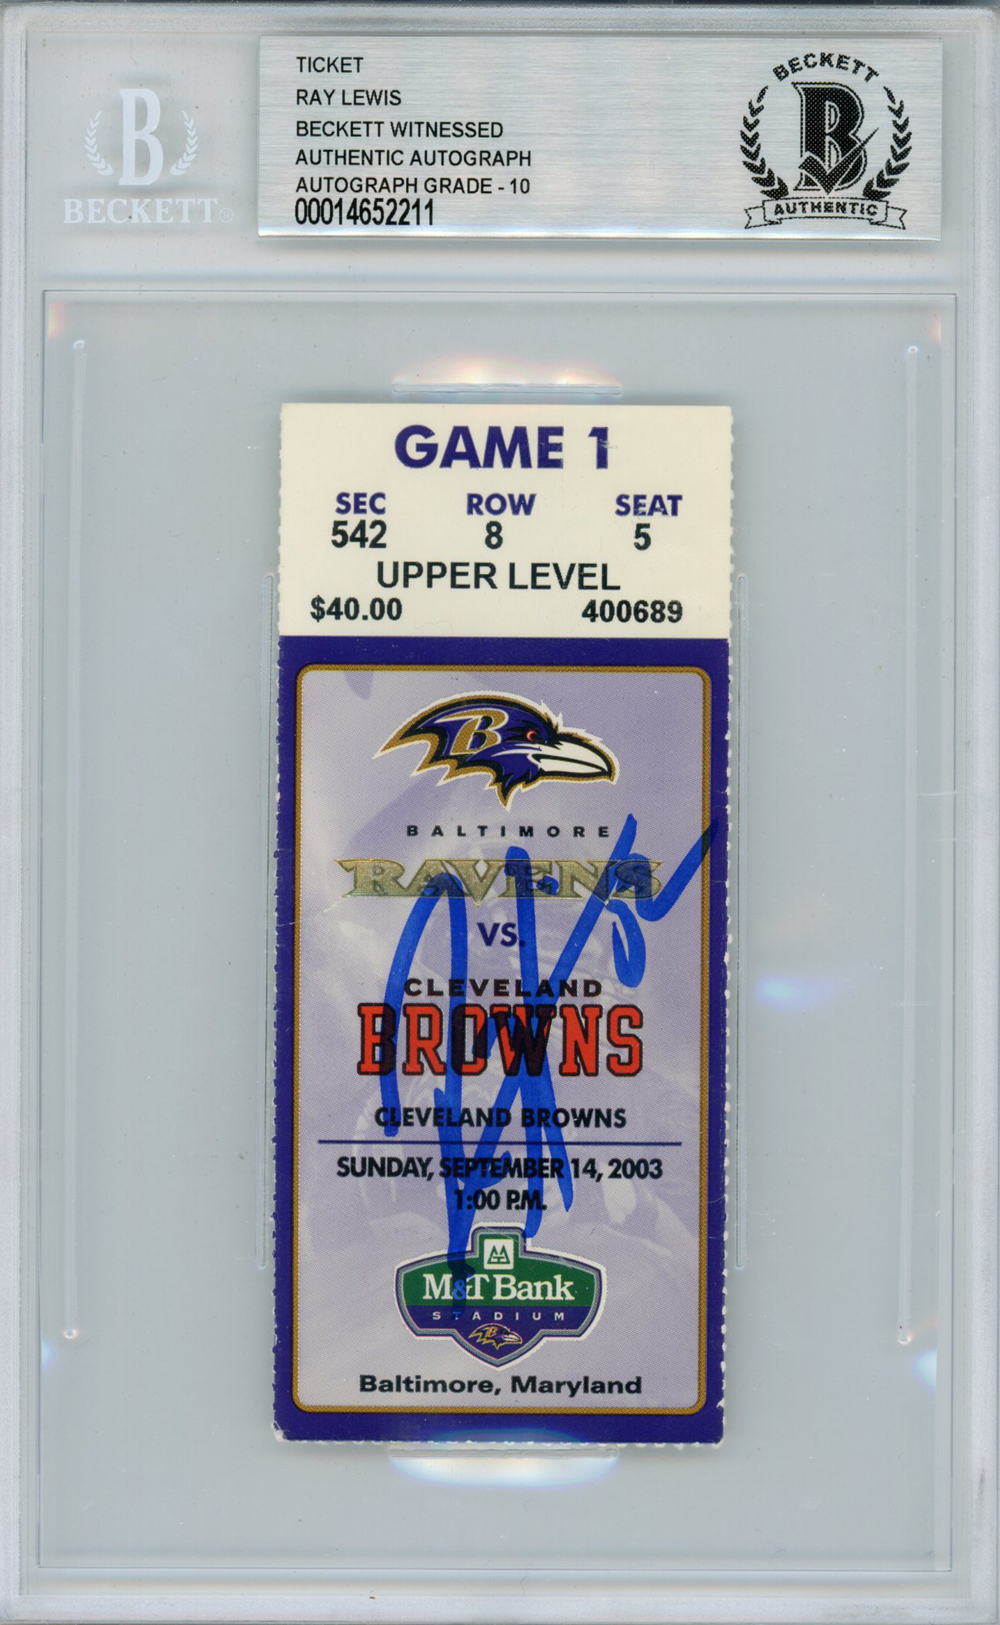 Ray Lewis Autographed/Signed 9/14/2003 vs Browns Ticket Beckett Slab